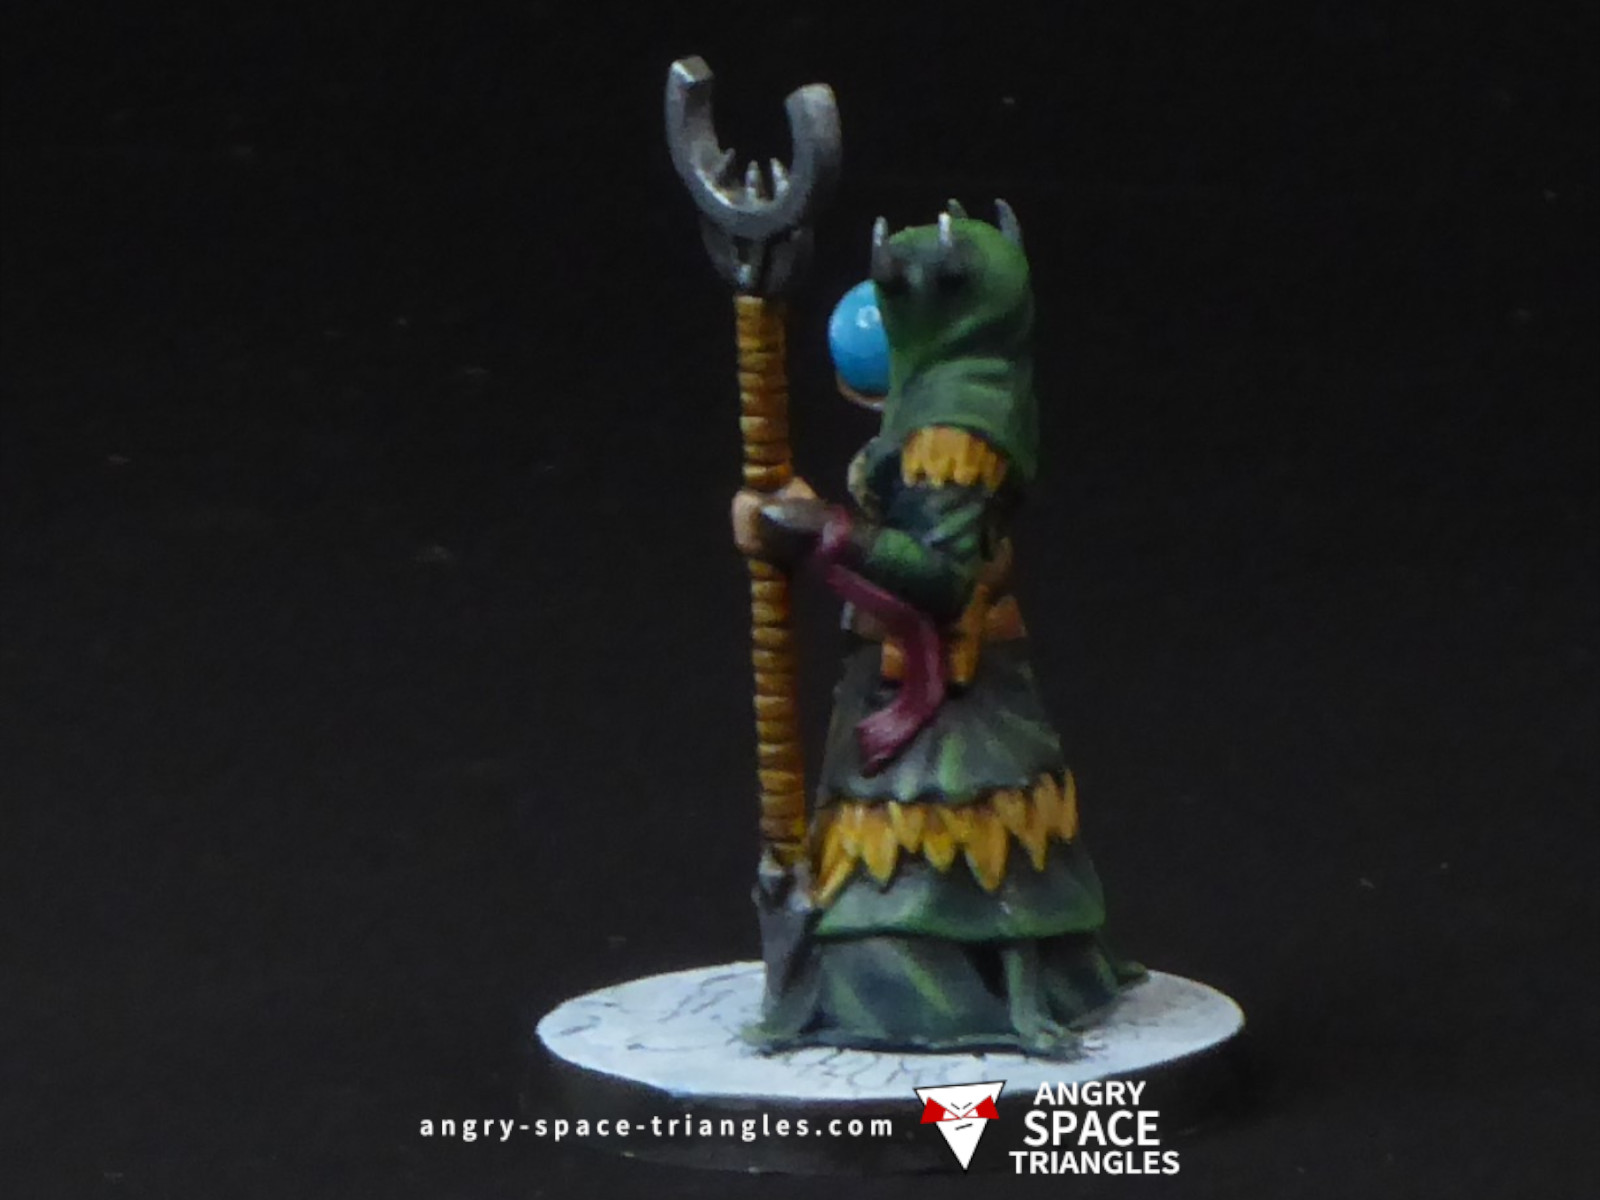 Painted fantasy female sorcerer in green